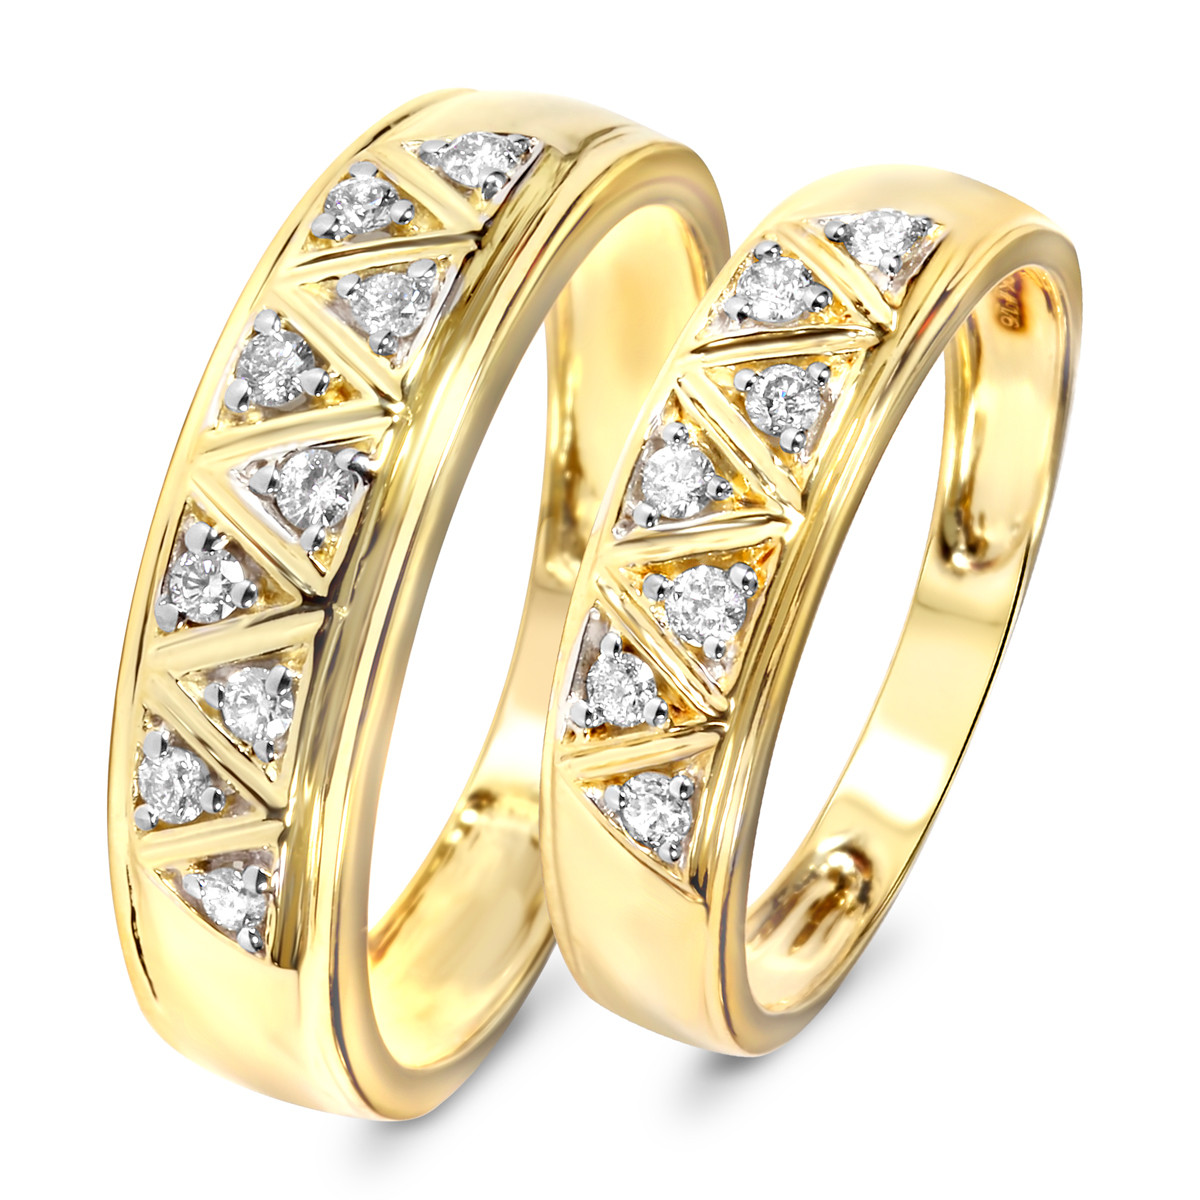 Yellow Gold Wedding Rings Sets For His And Her
 1 3 Carat T W Diamond His And Hers Wedding Band Set 10K